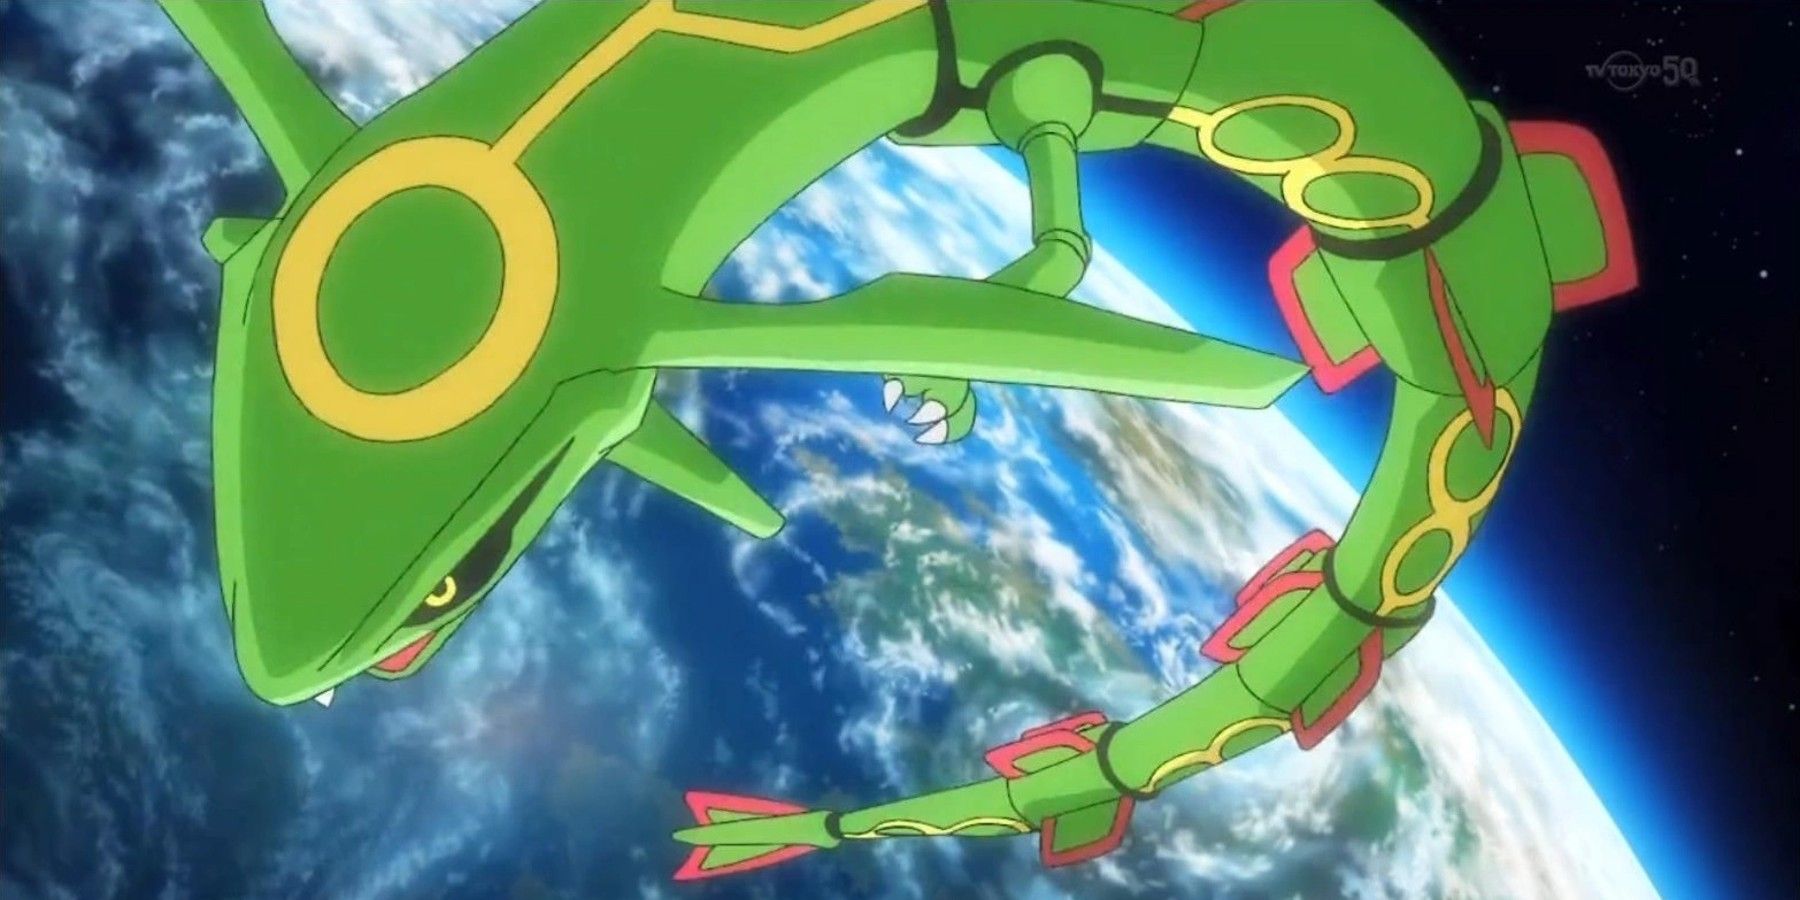 rayquaza flying in outer space in the pokemon anime